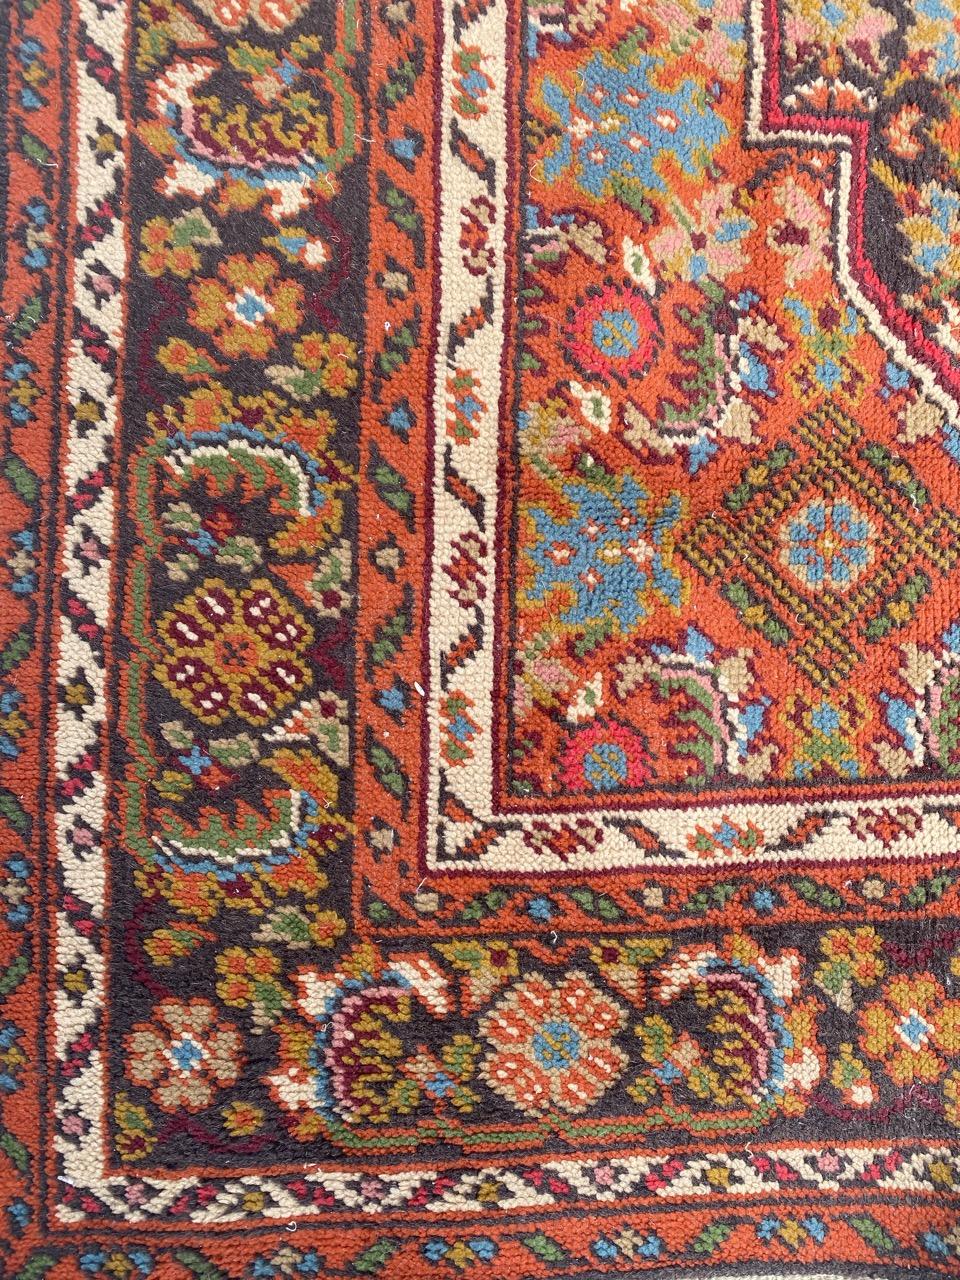 Nice Turkish rug with beautiful Malayer botteh design and beautiful colors with brown field, entirely hand knotted with wool velvet on cotton foundation.